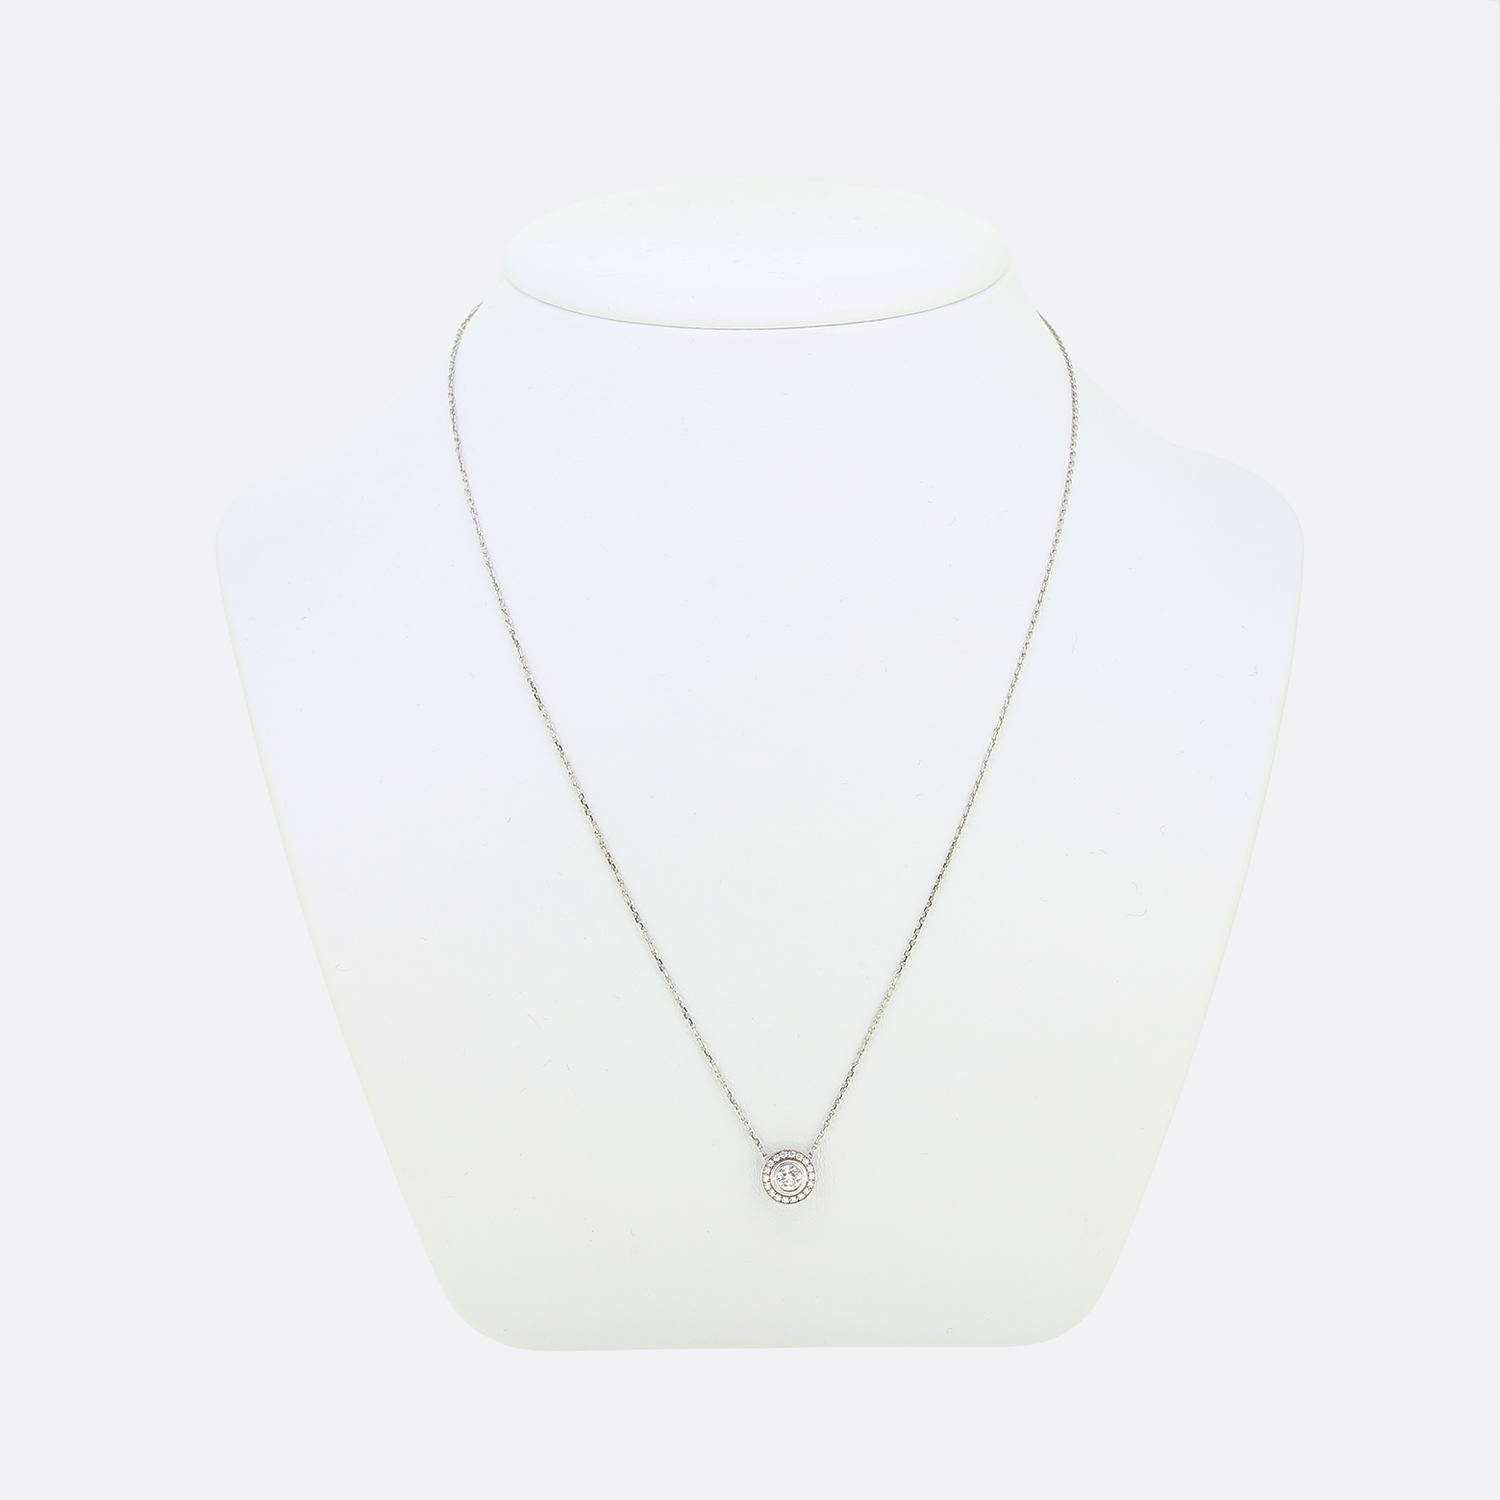 Here we have a fabulous necklace from the world renowned jewellery house of Cartier. This piece forms part of their iconic 'D'amour' collection and features a single 0.25ct round brilliant cut diamond surrounded by a halo of smaller matching stones